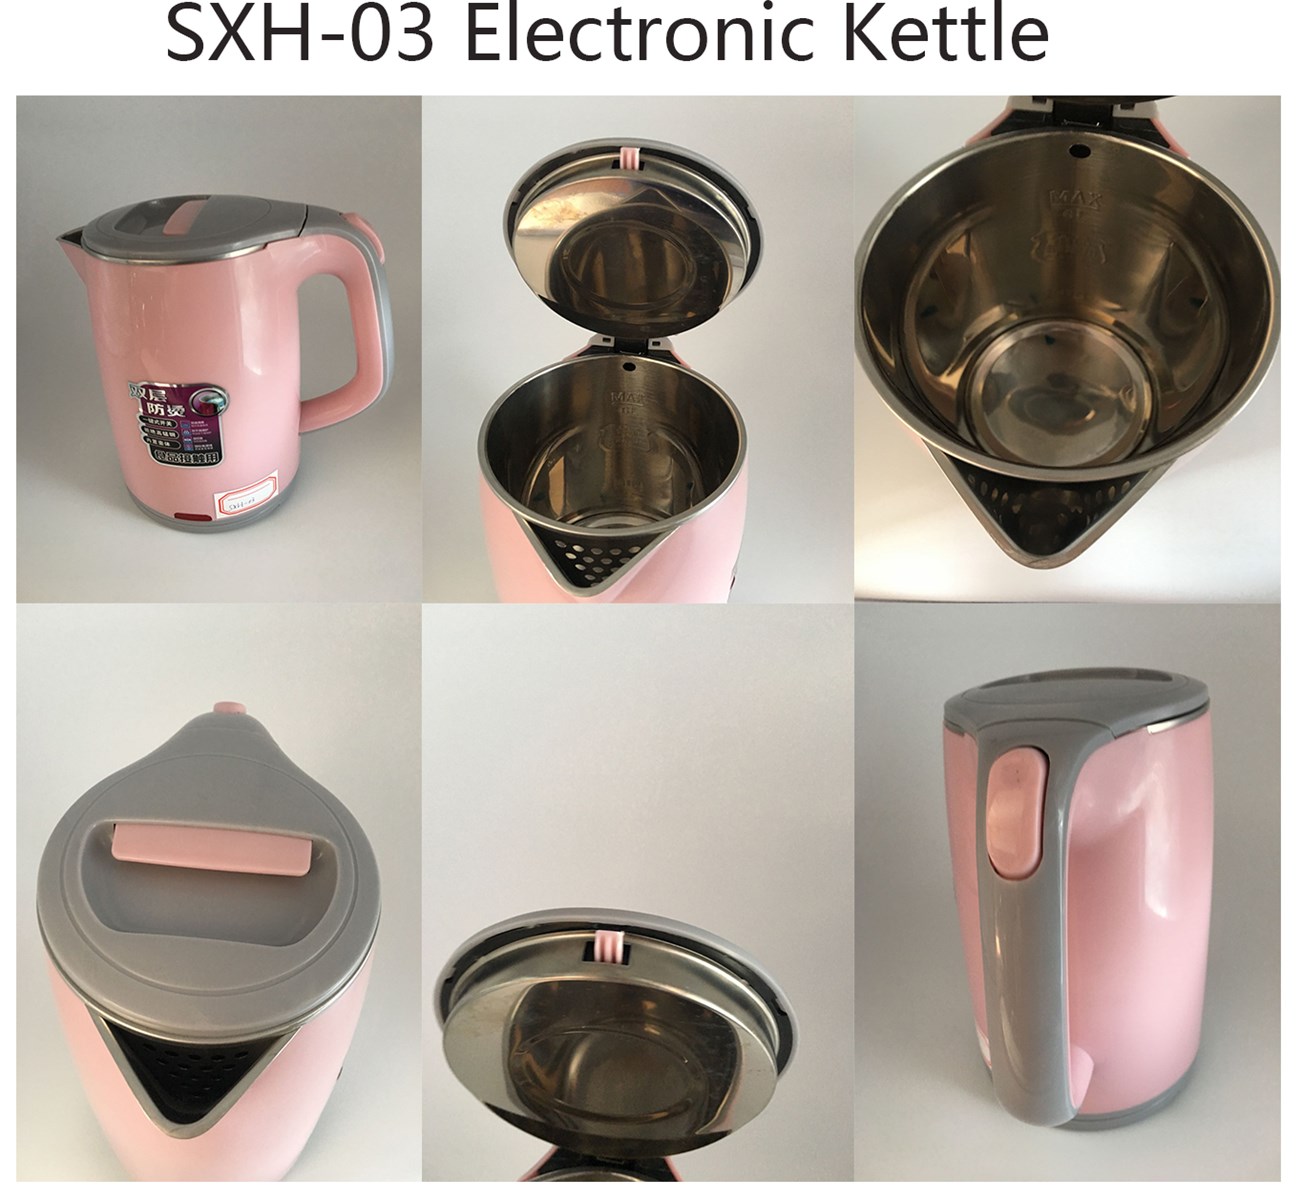 SXH03 Plastic Outside and Stainless Inside Electronic Kettle with Automatic Shutoff function 18L